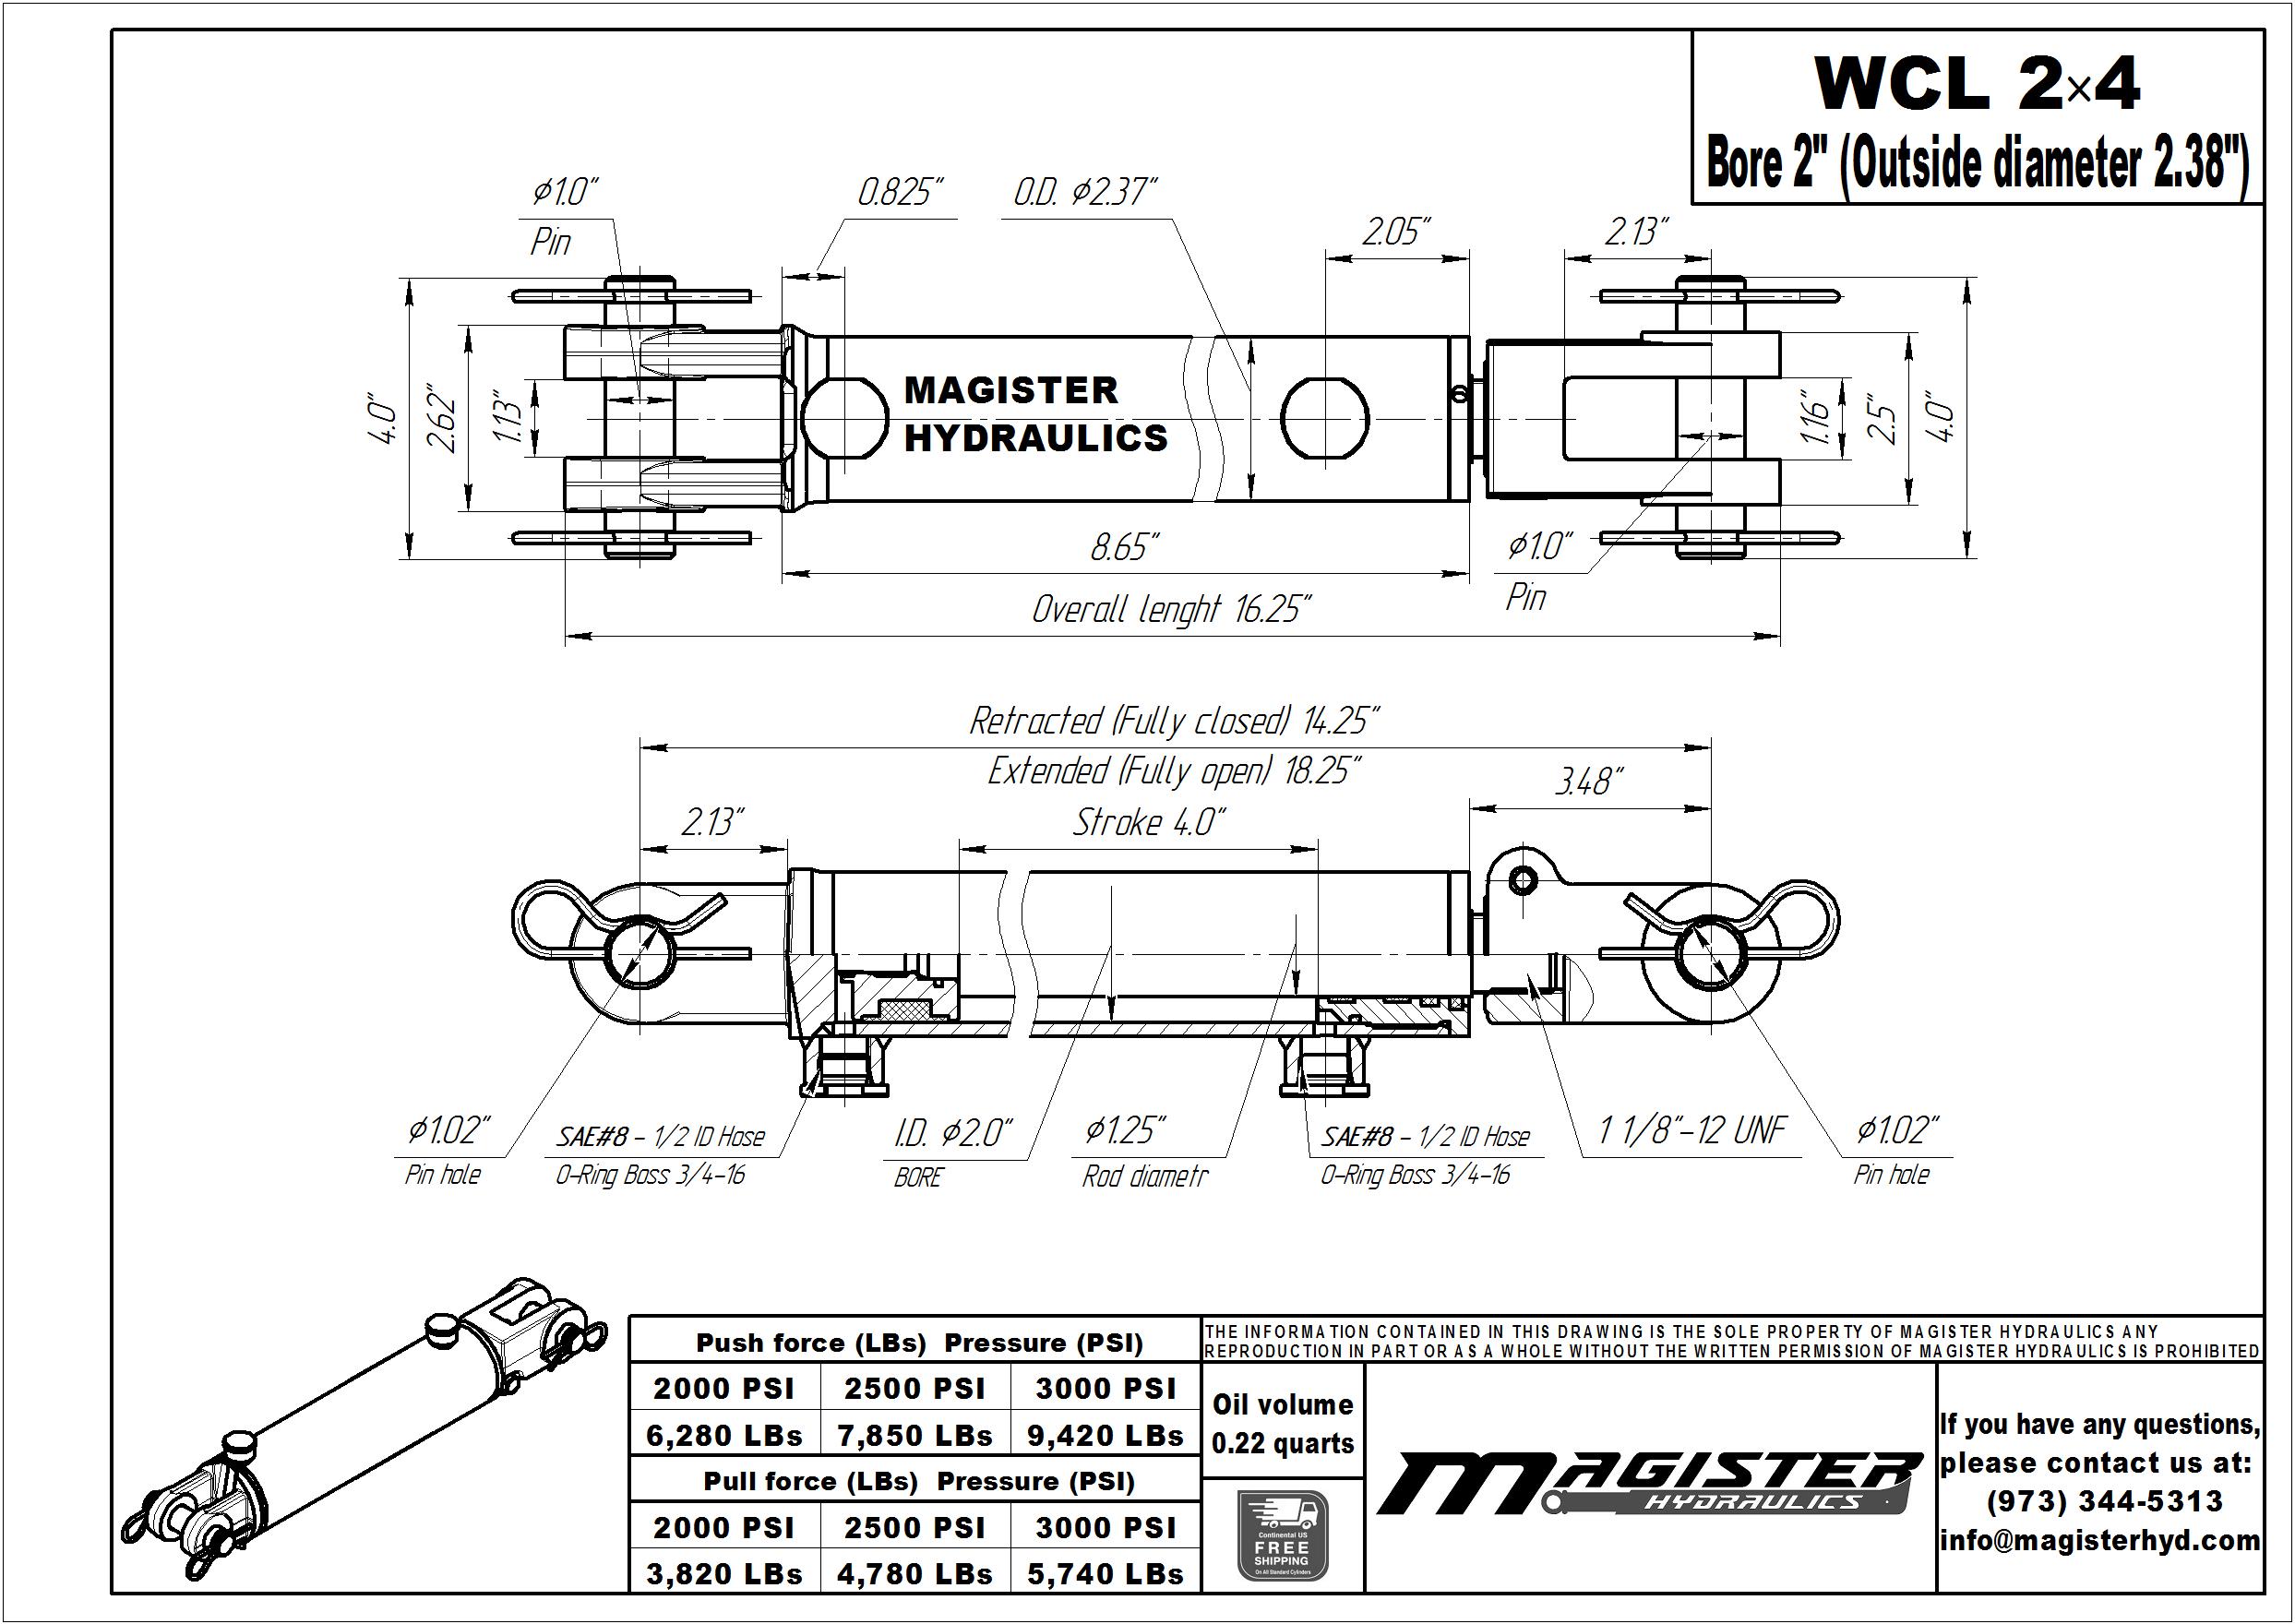 2 bore x 4 stroke hydraulic cylinder, welded clevis double acting cylinder | Magister Hydraulics